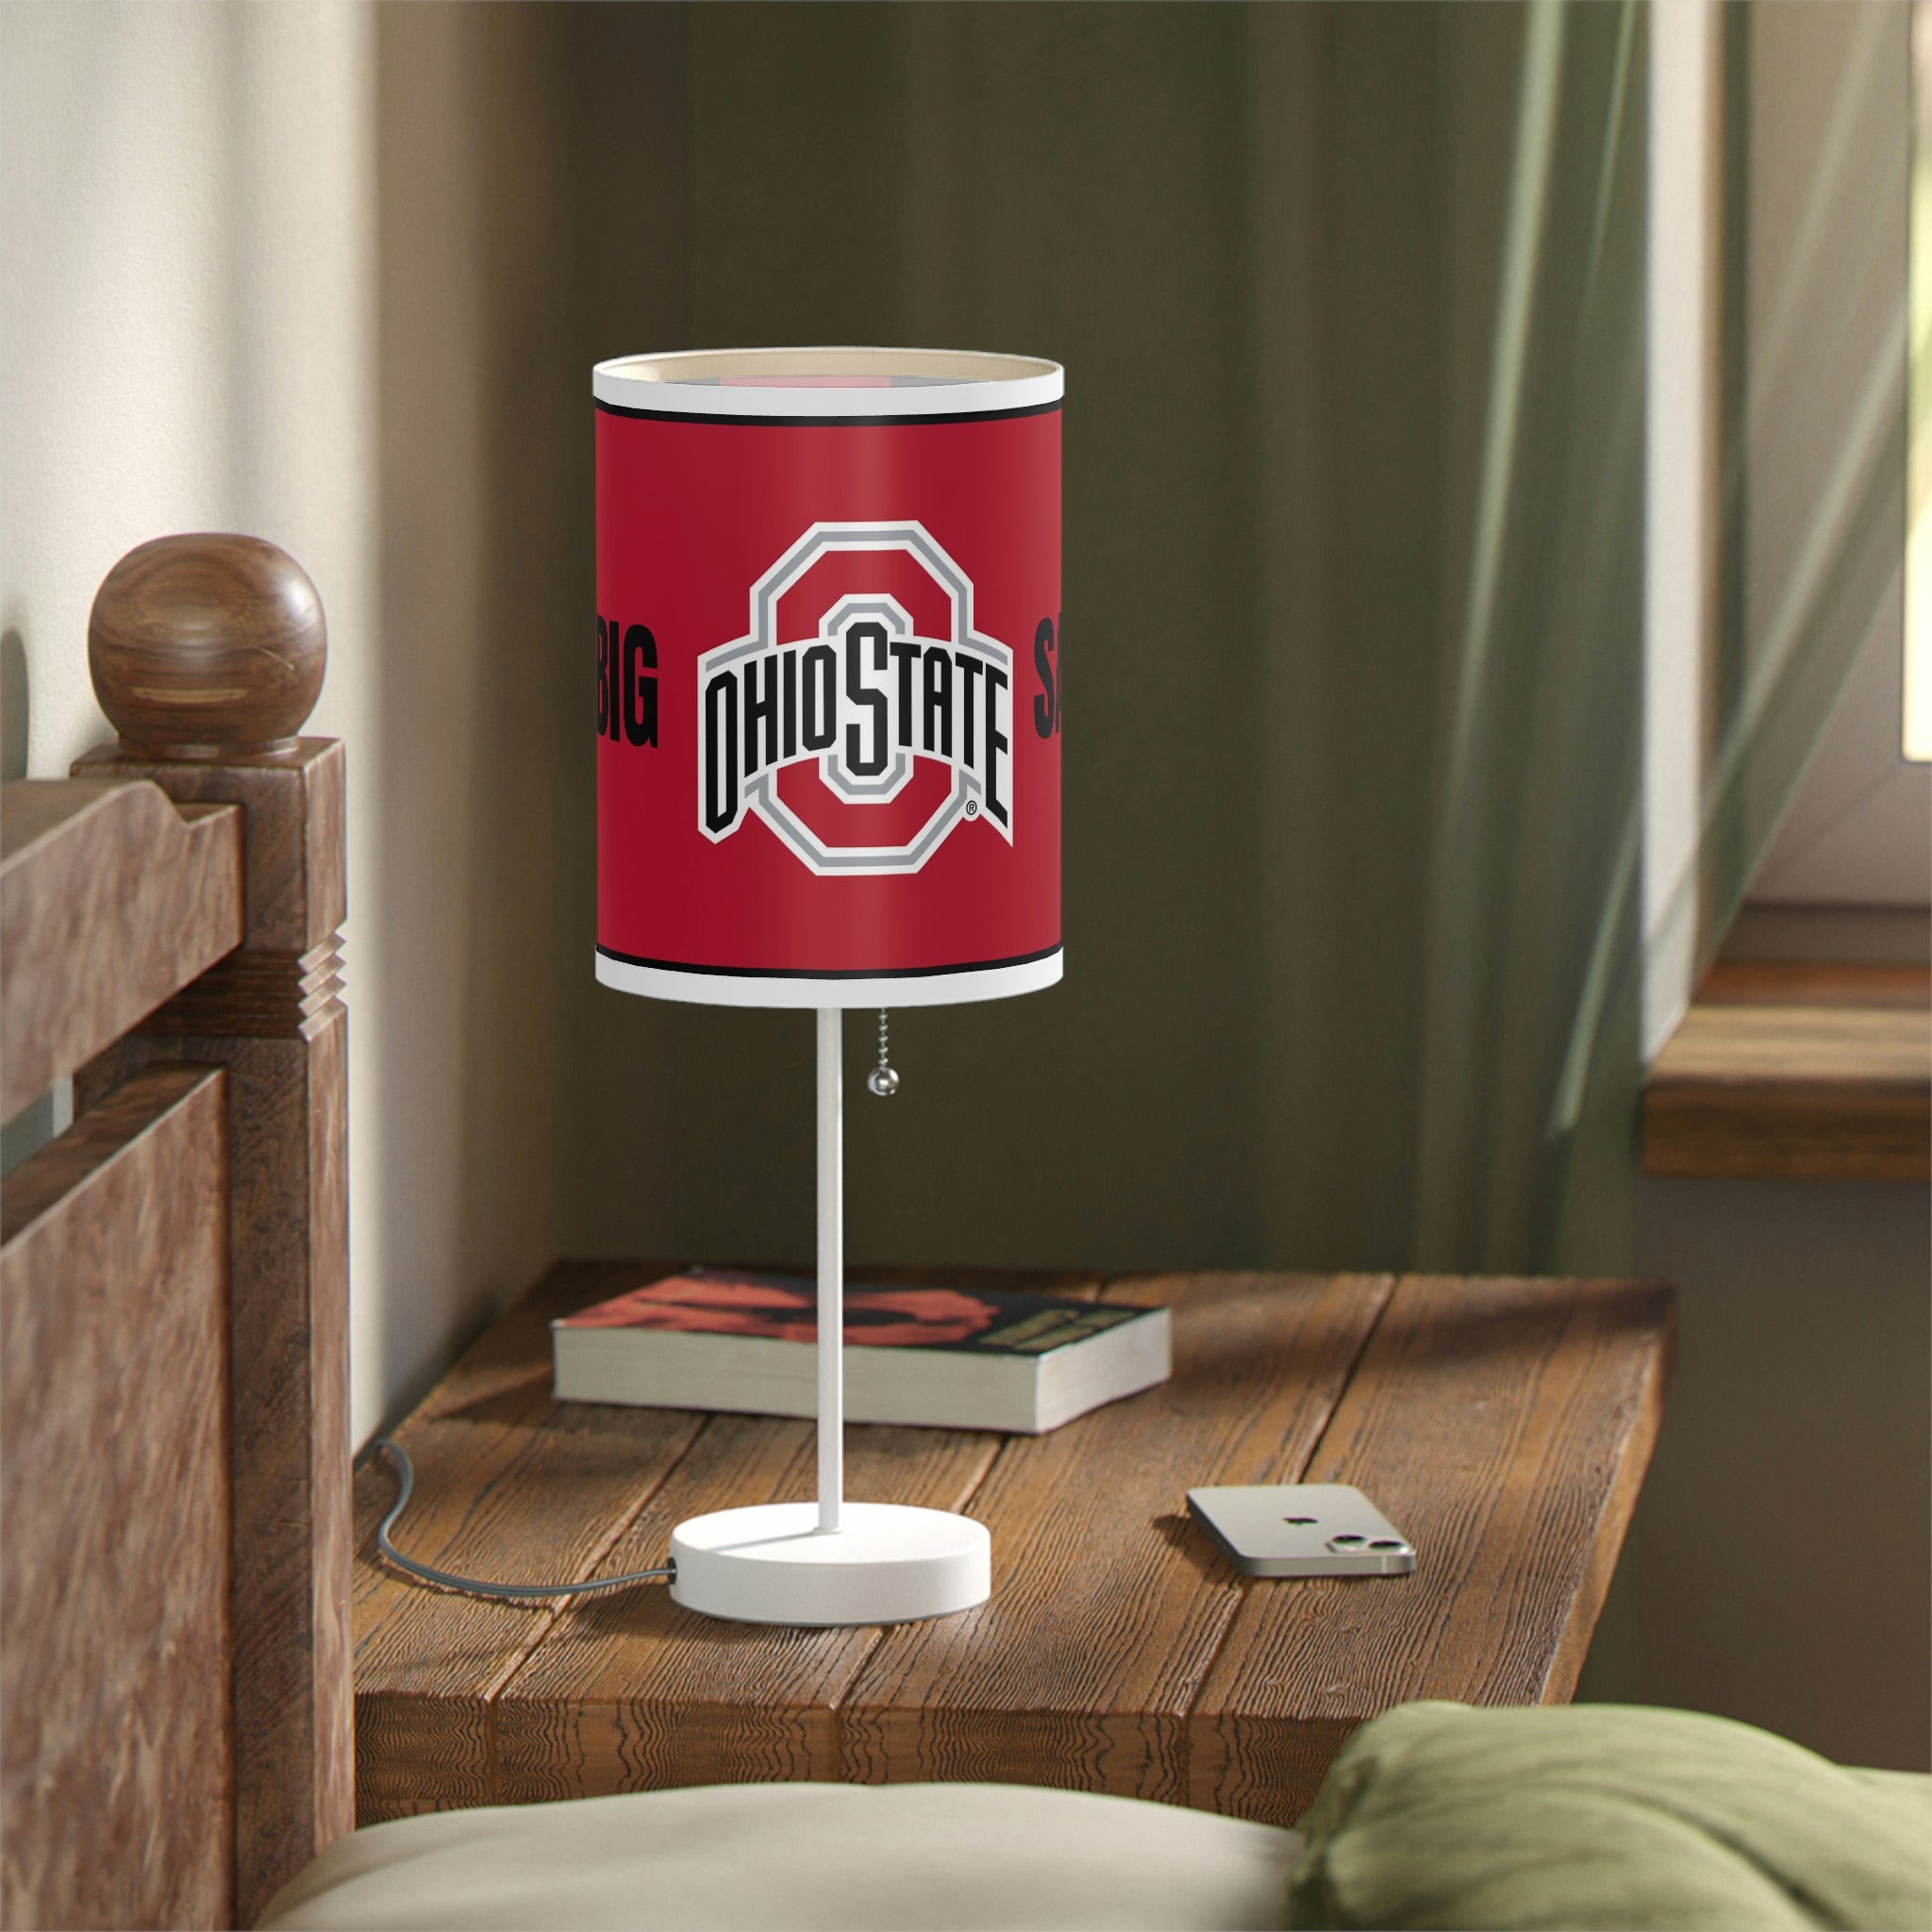 Personalized Lamp on a Stand, US|CA plug ( if you'd like something made that you do not see please email me )